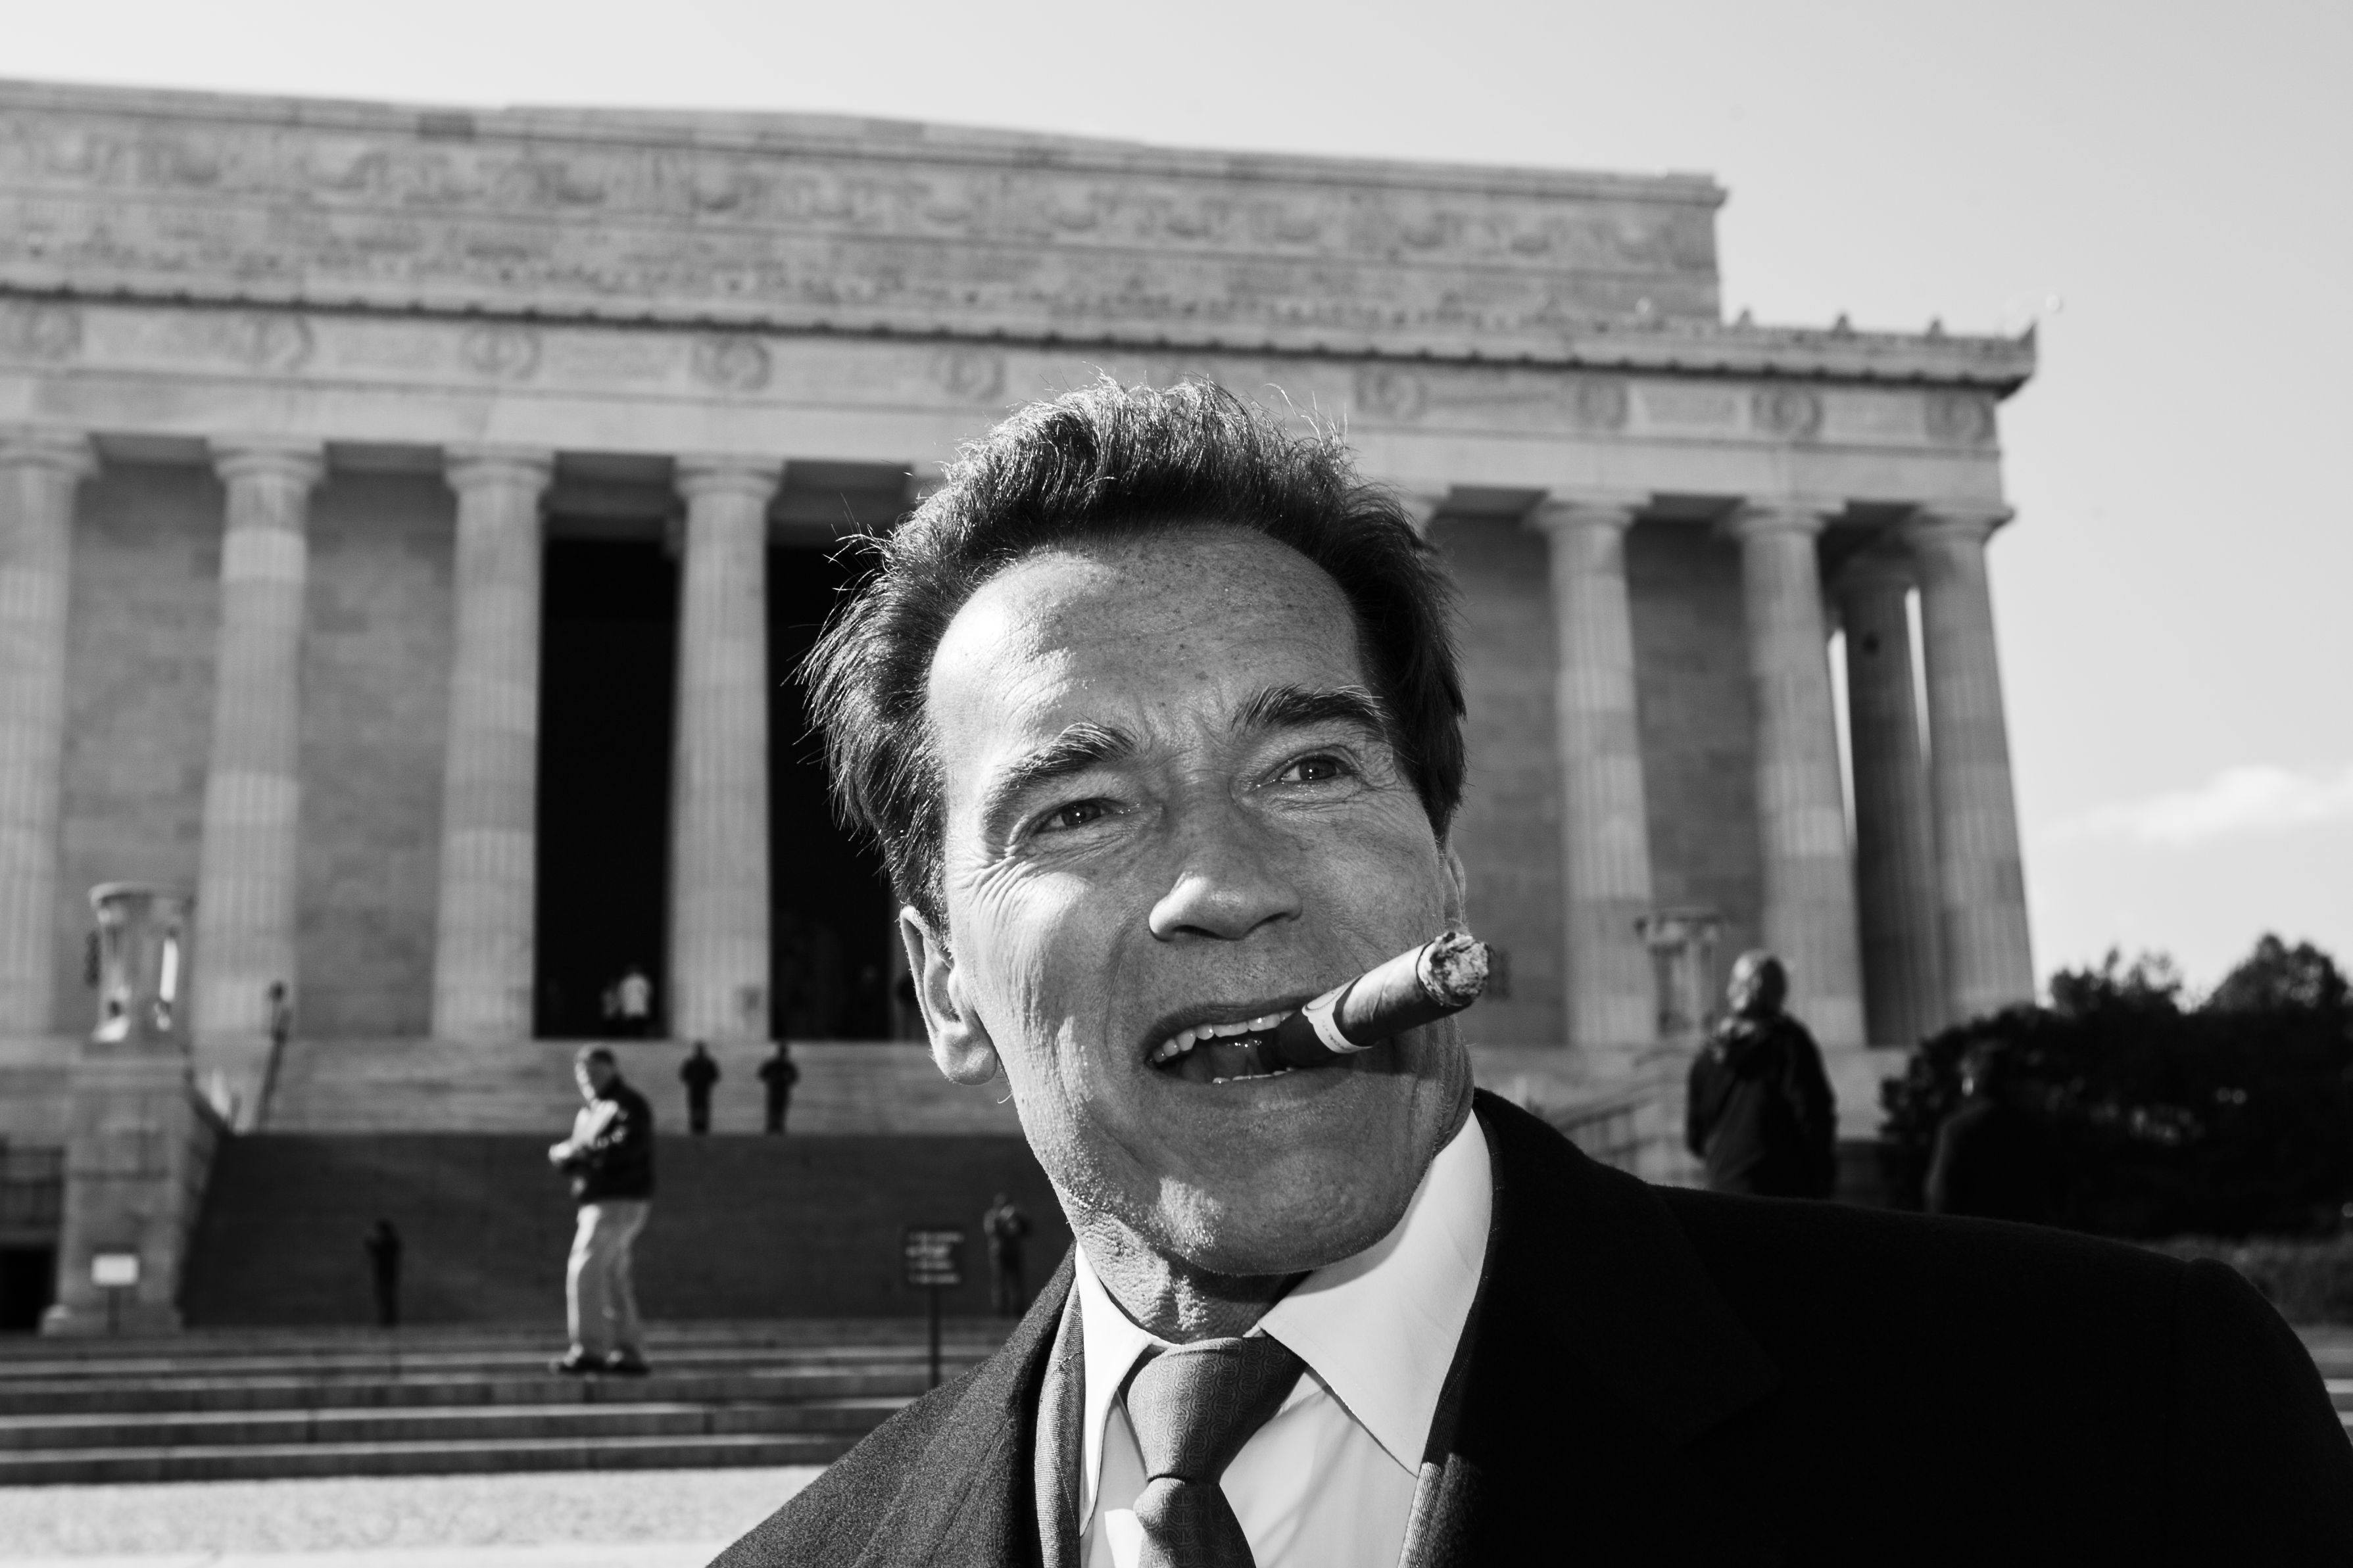 Arnold Schwarzenegger with the Lincoln
Memorial, in a photo taken by Peter Grigsby in 2009, recently published in the two-part photo book. Photos: Handout